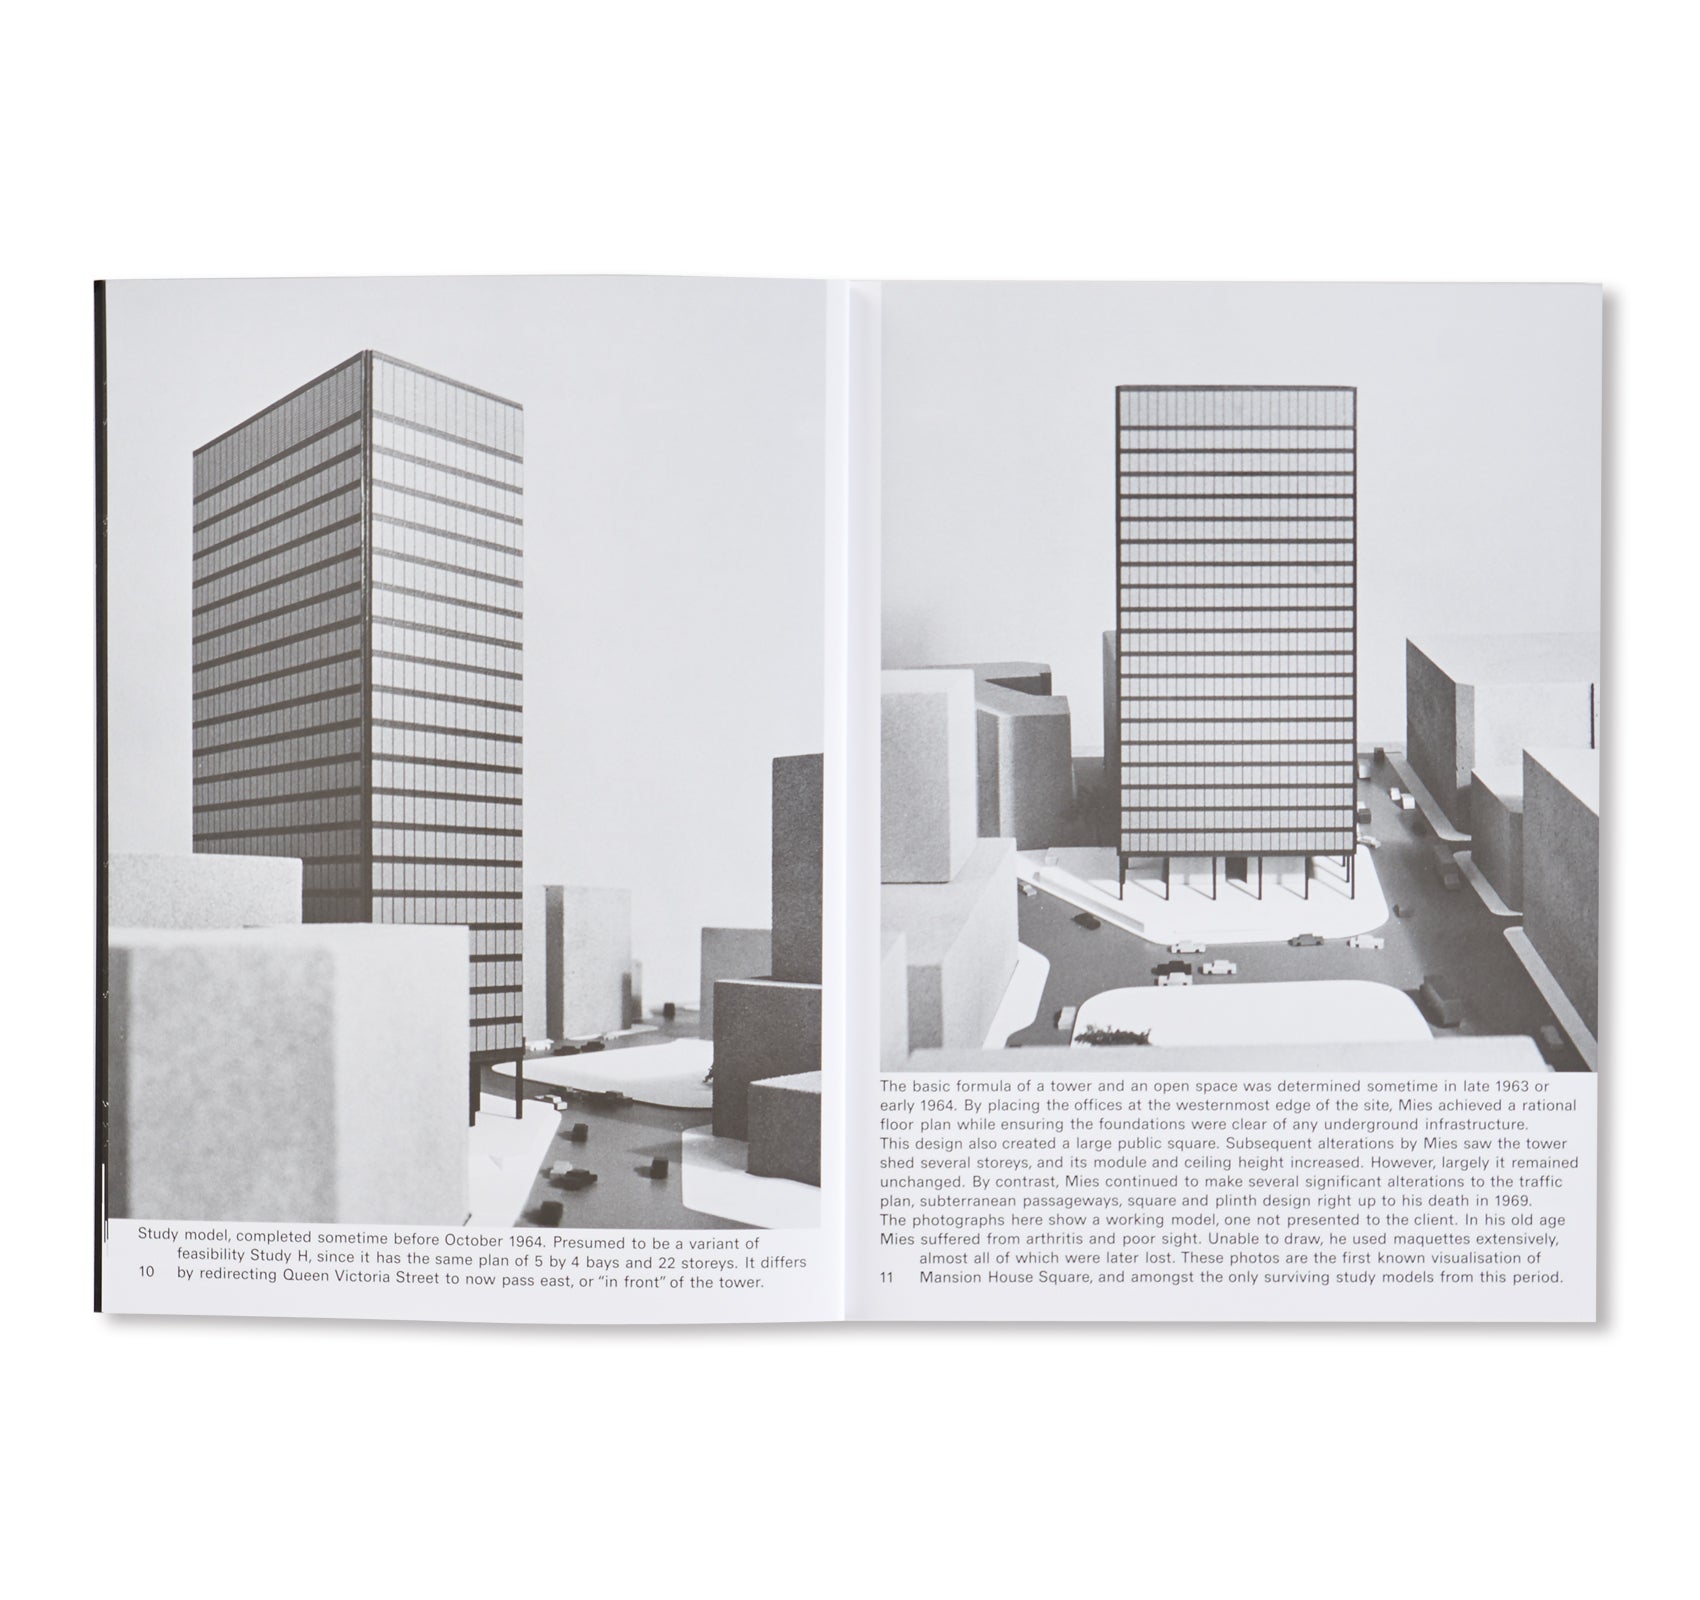 MIES IN LONDON by Mies van der Rohe [SOFTCOVER]